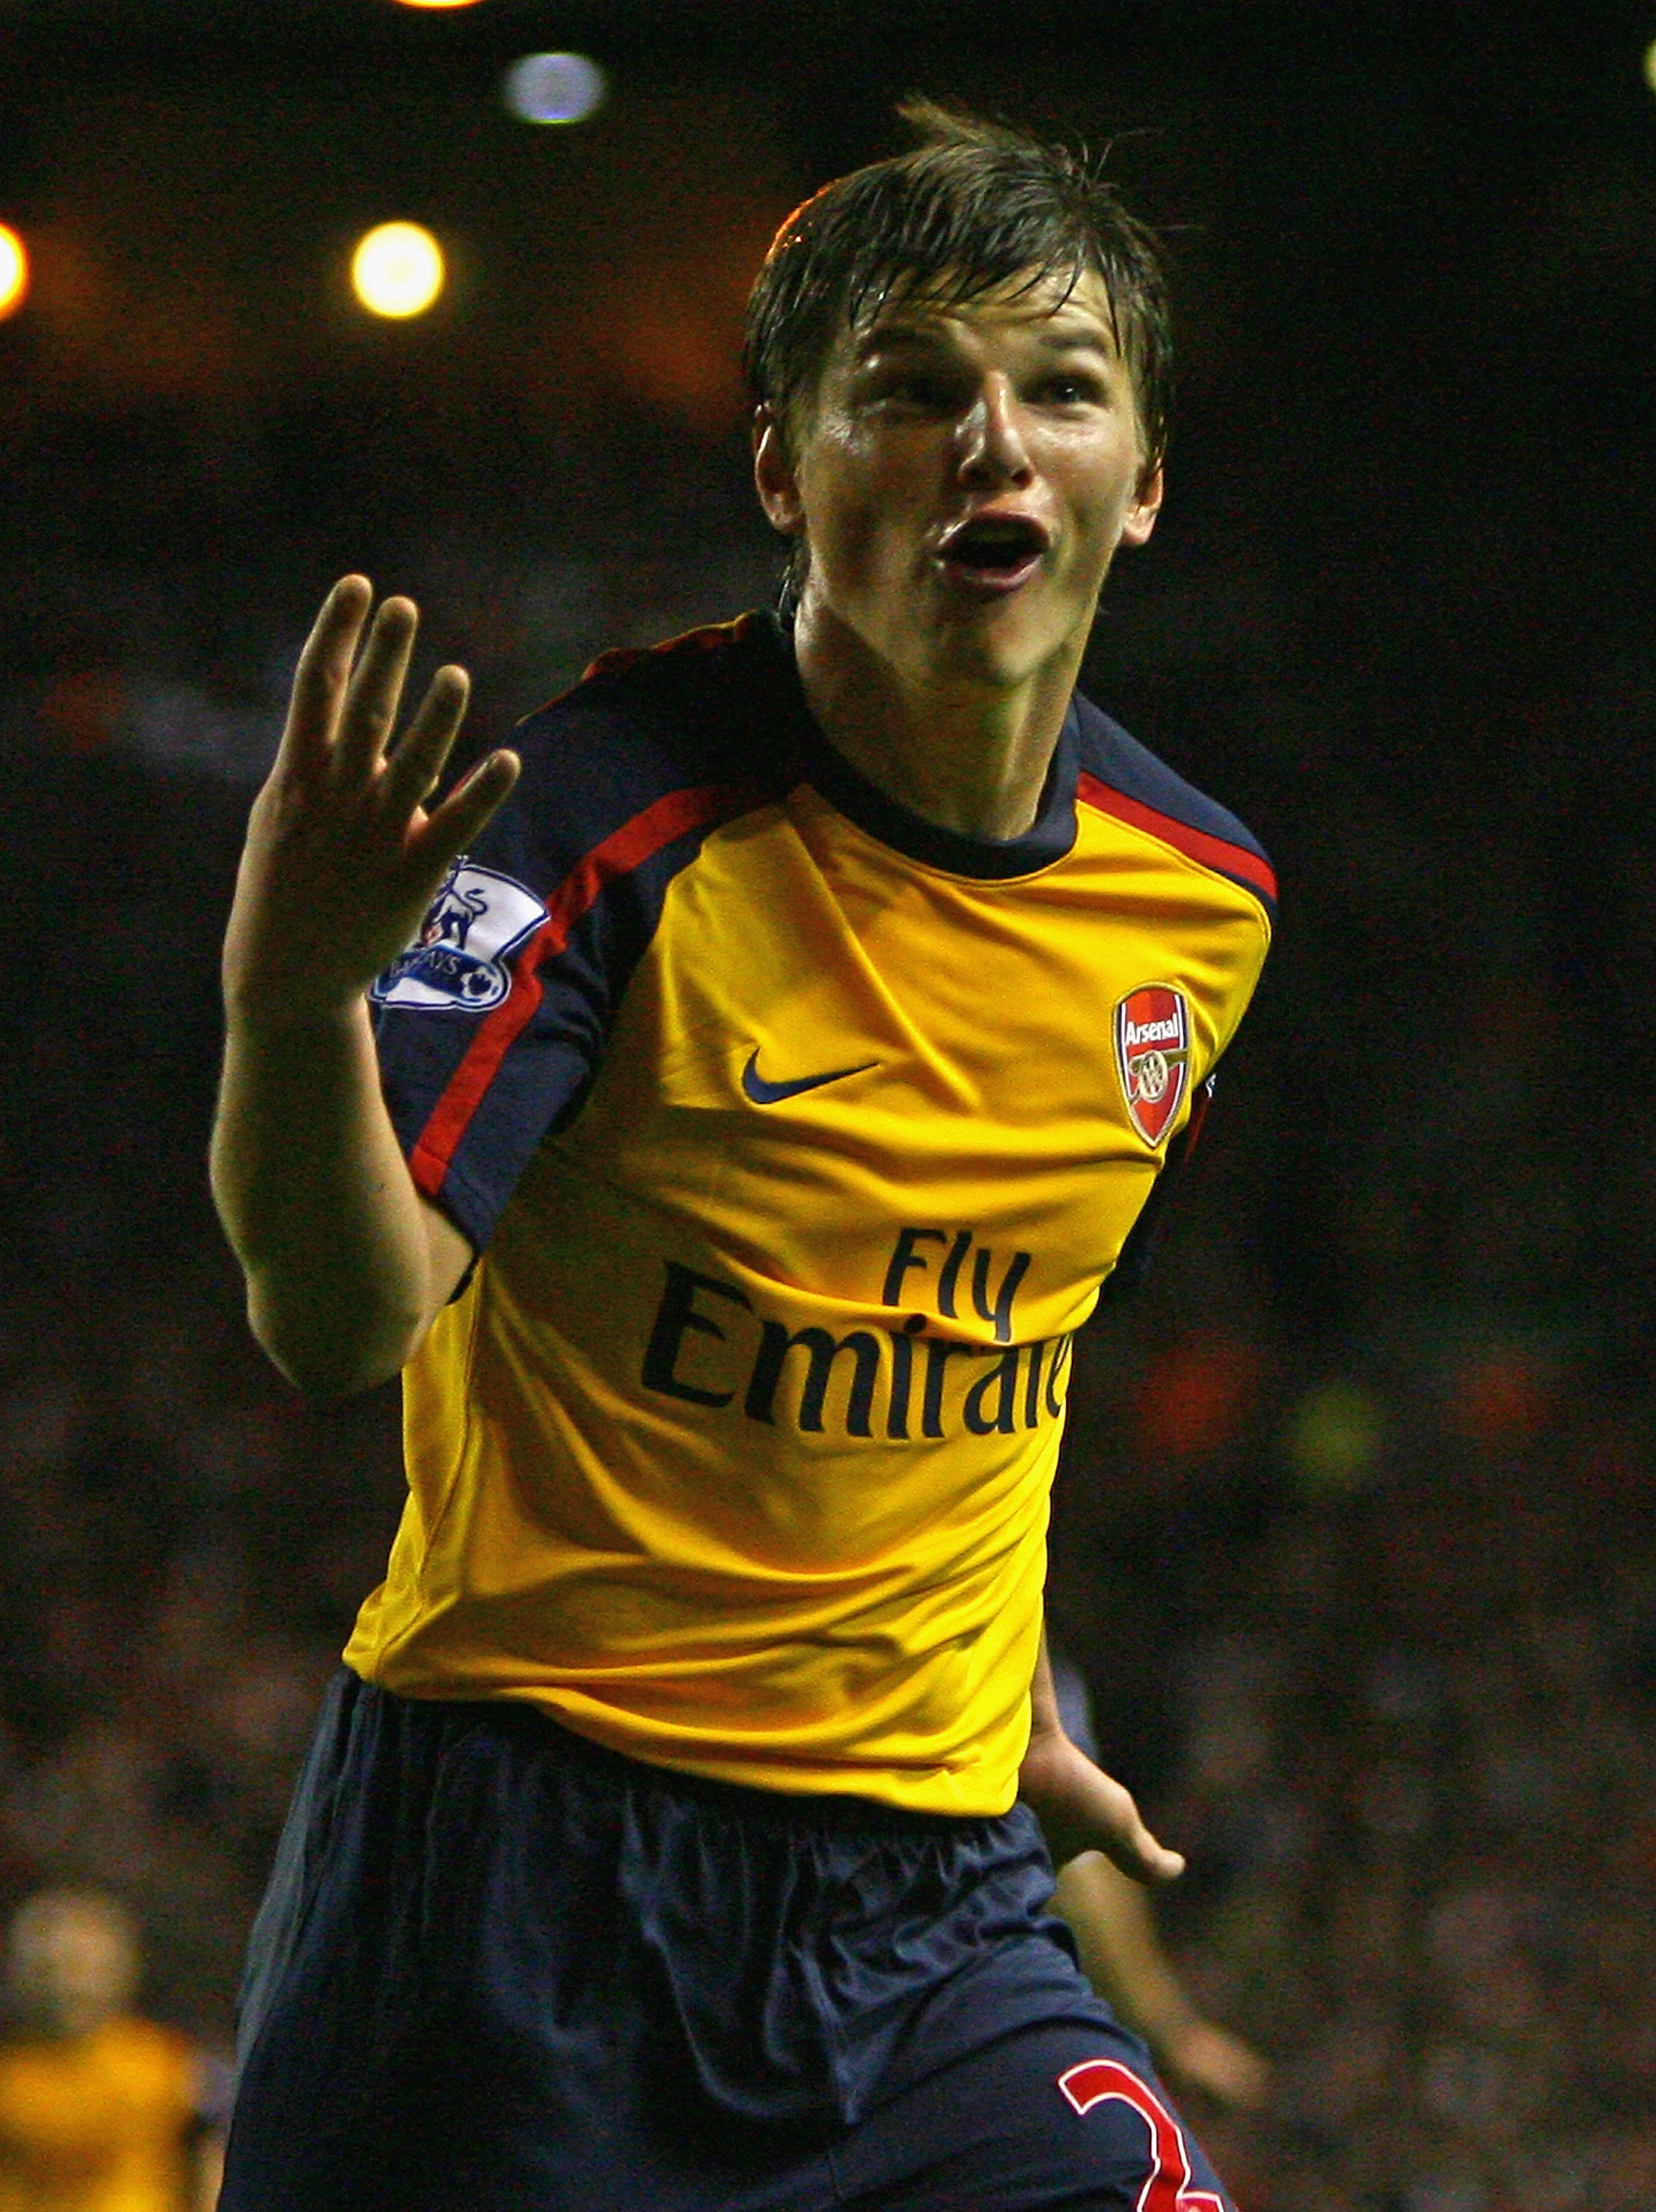 LIVERPOOL, UNITED KINGDOM - APRIL 21:  Andrey Arshavin of Arsenal  celebrates scoring his team's and his fourth goal during the Barclays Premier League match between Liverpool and Arsenal at Anfield on April 21, 2009 in Liverpool, England.  (Photo by Alex